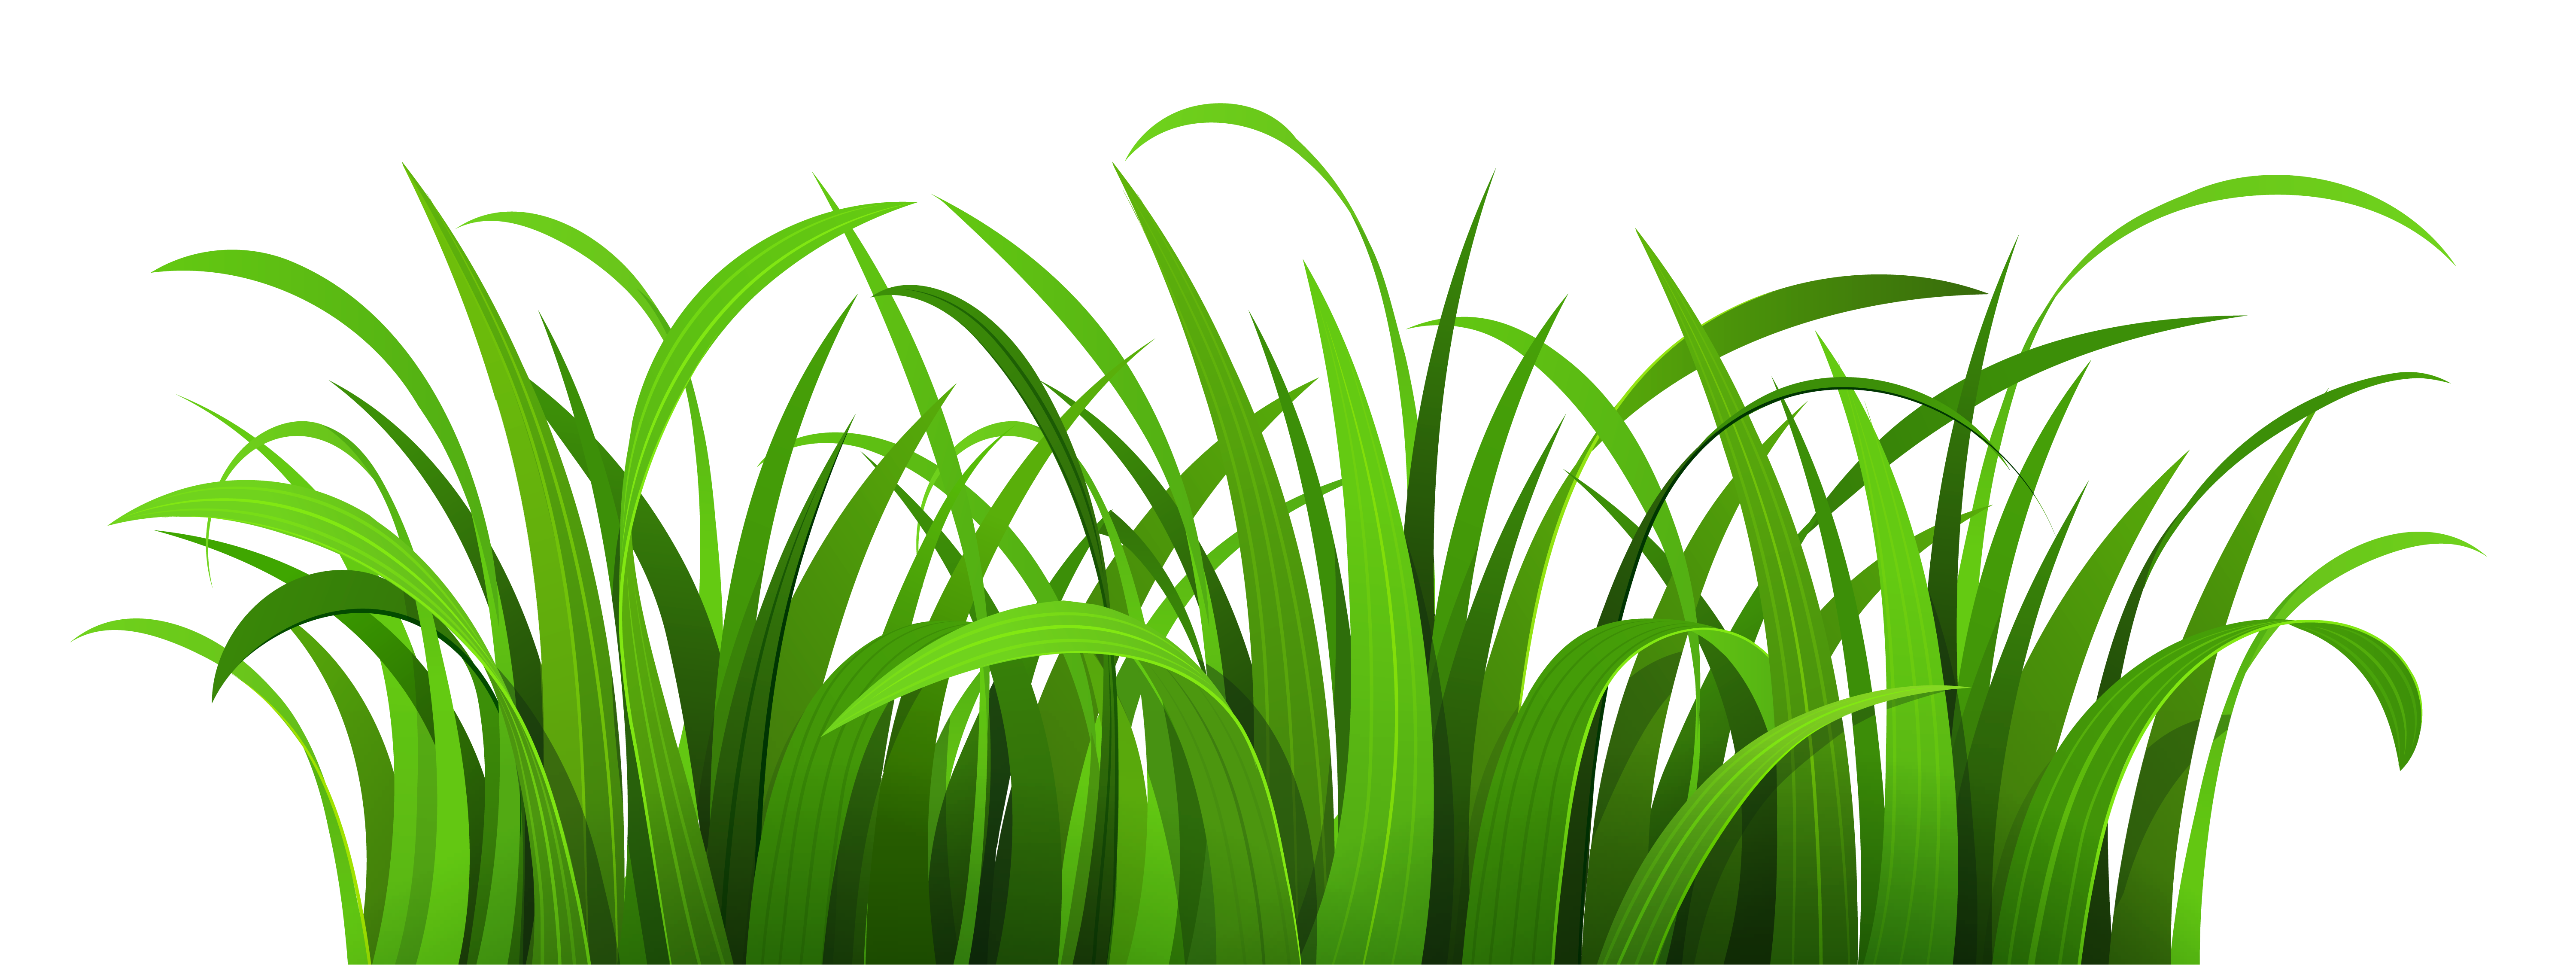 Free Rumput.png, Download Free Rumput.png png images, Free ClipArts on